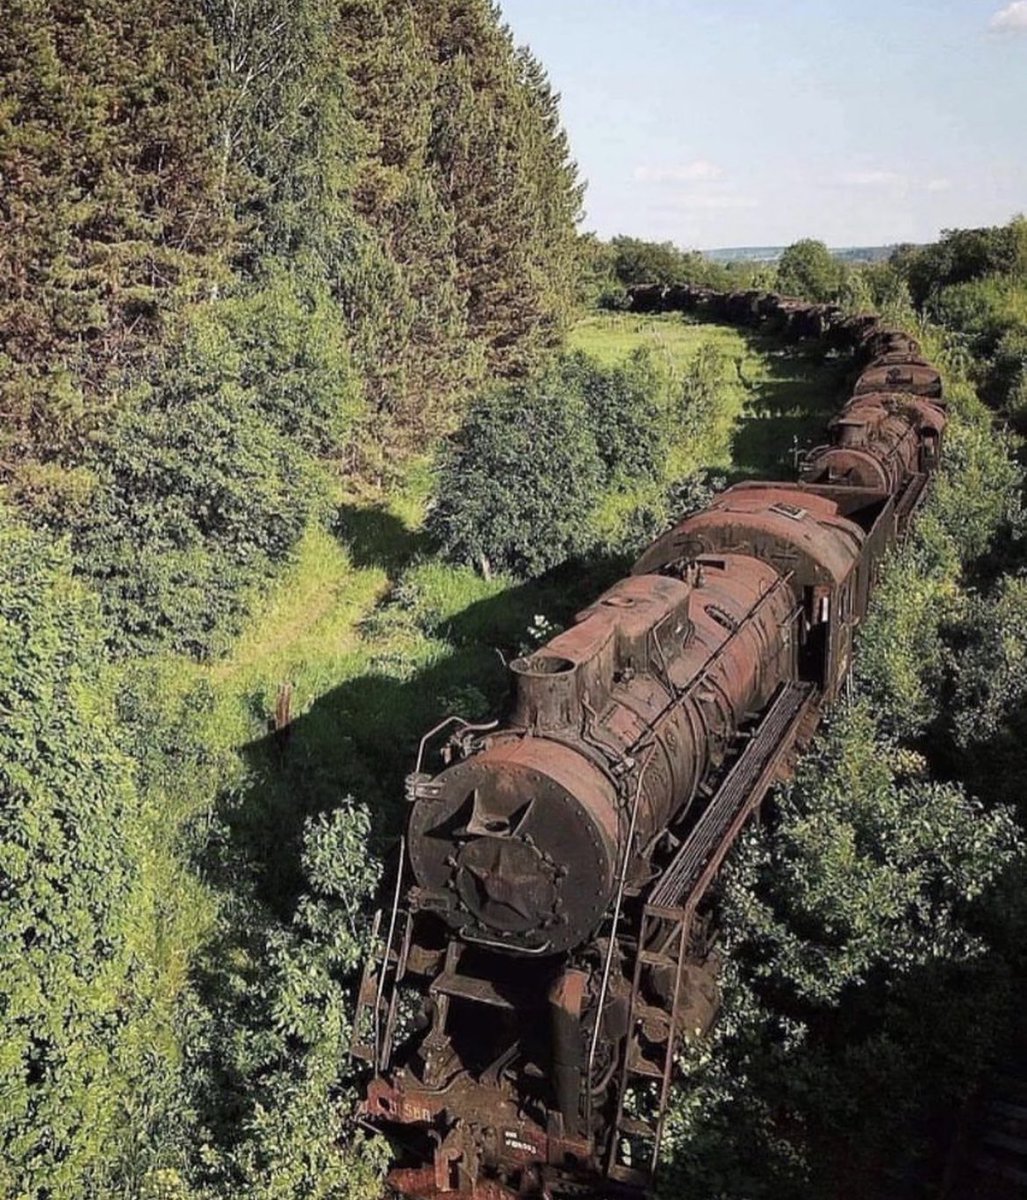 In Russia, during the Cold War, hundreds of old steam-engine trains were strategically parked on old tracks as a contingency plan in case the Russian electric grid faced any disruptions. The central Perm region of Russia is home to a unique sight - a train cemetery filled with…